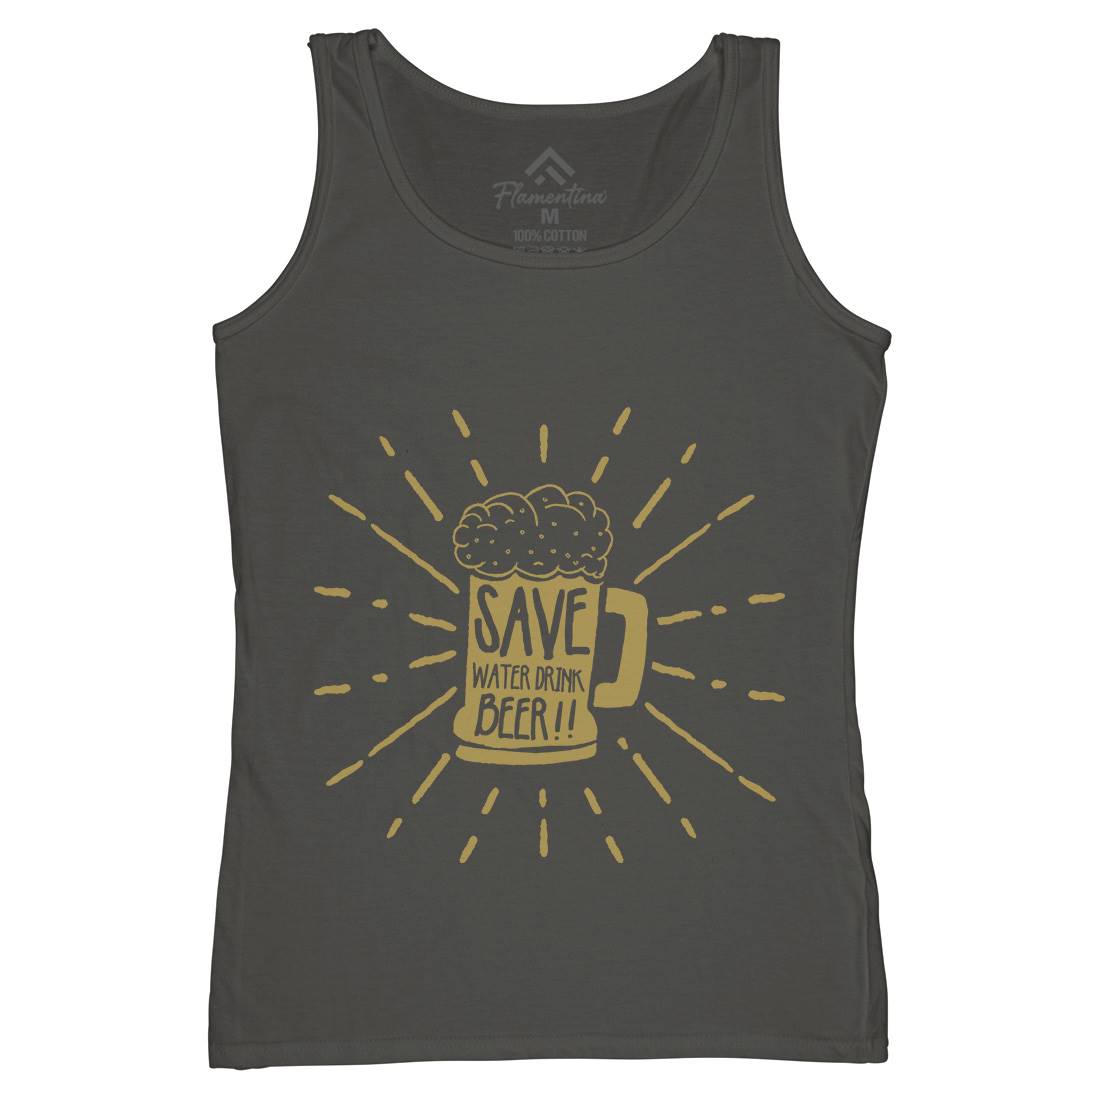 Save Water Womens Organic Tank Top Vest Drinks A368